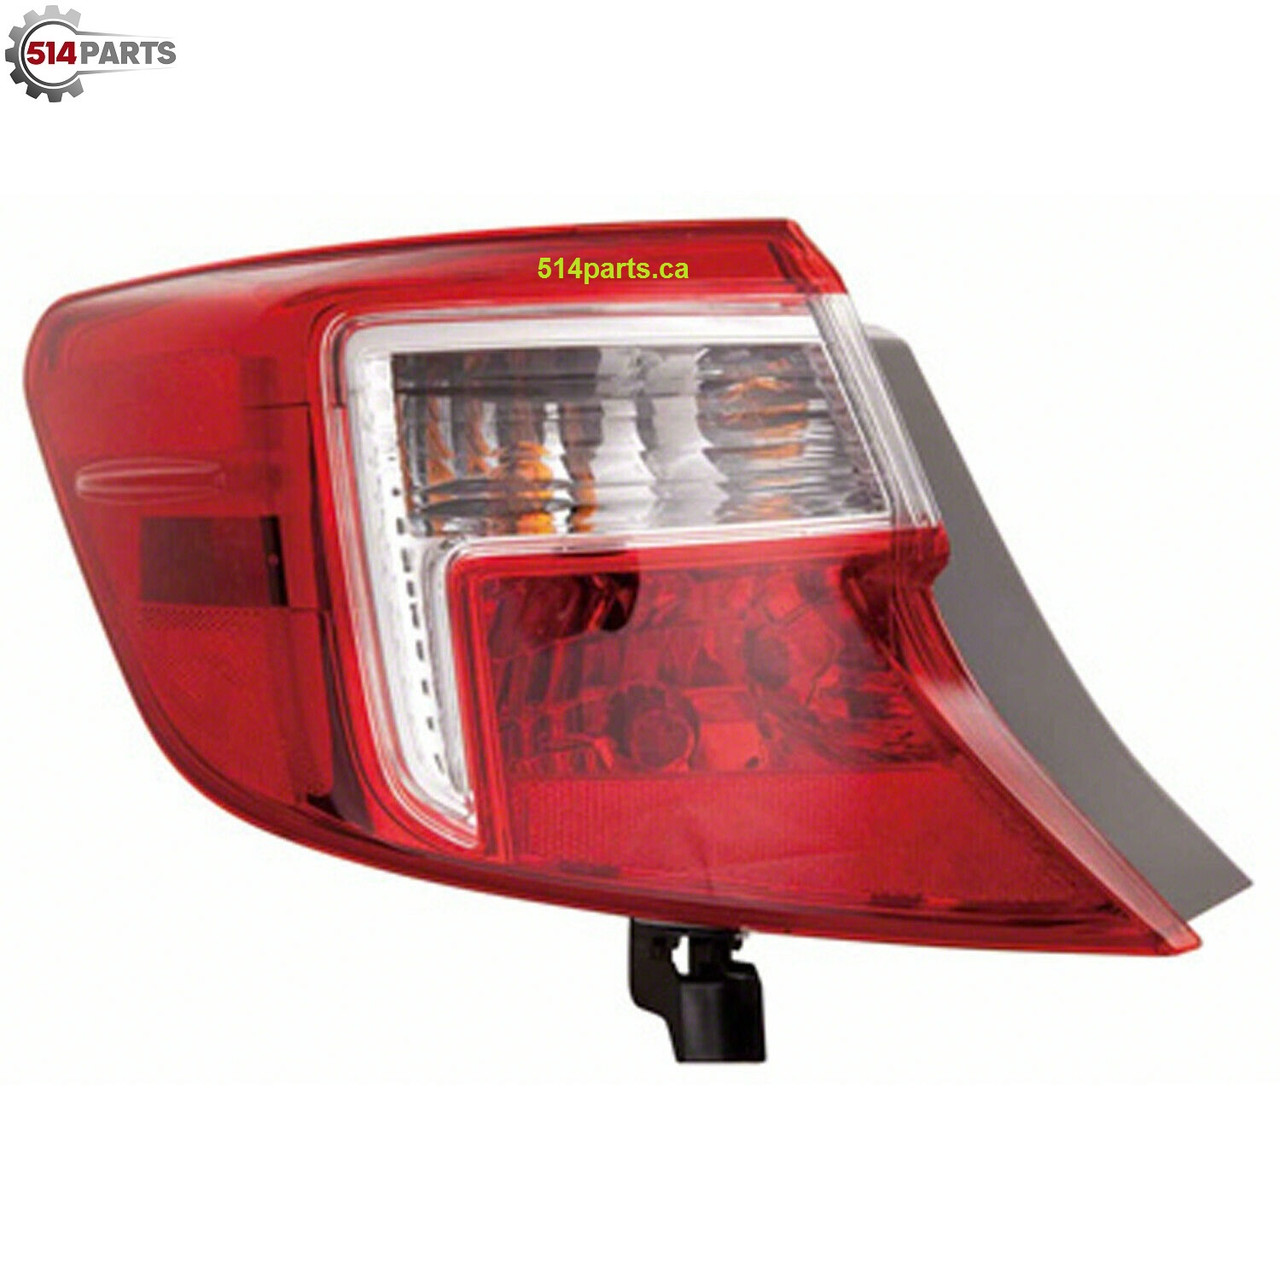 2012 - 2014 TOYOTA CAMRY and CAMRY HYBRID TAIL LIGHTS High Quality - PHARES ARRIERE Haute Qualite